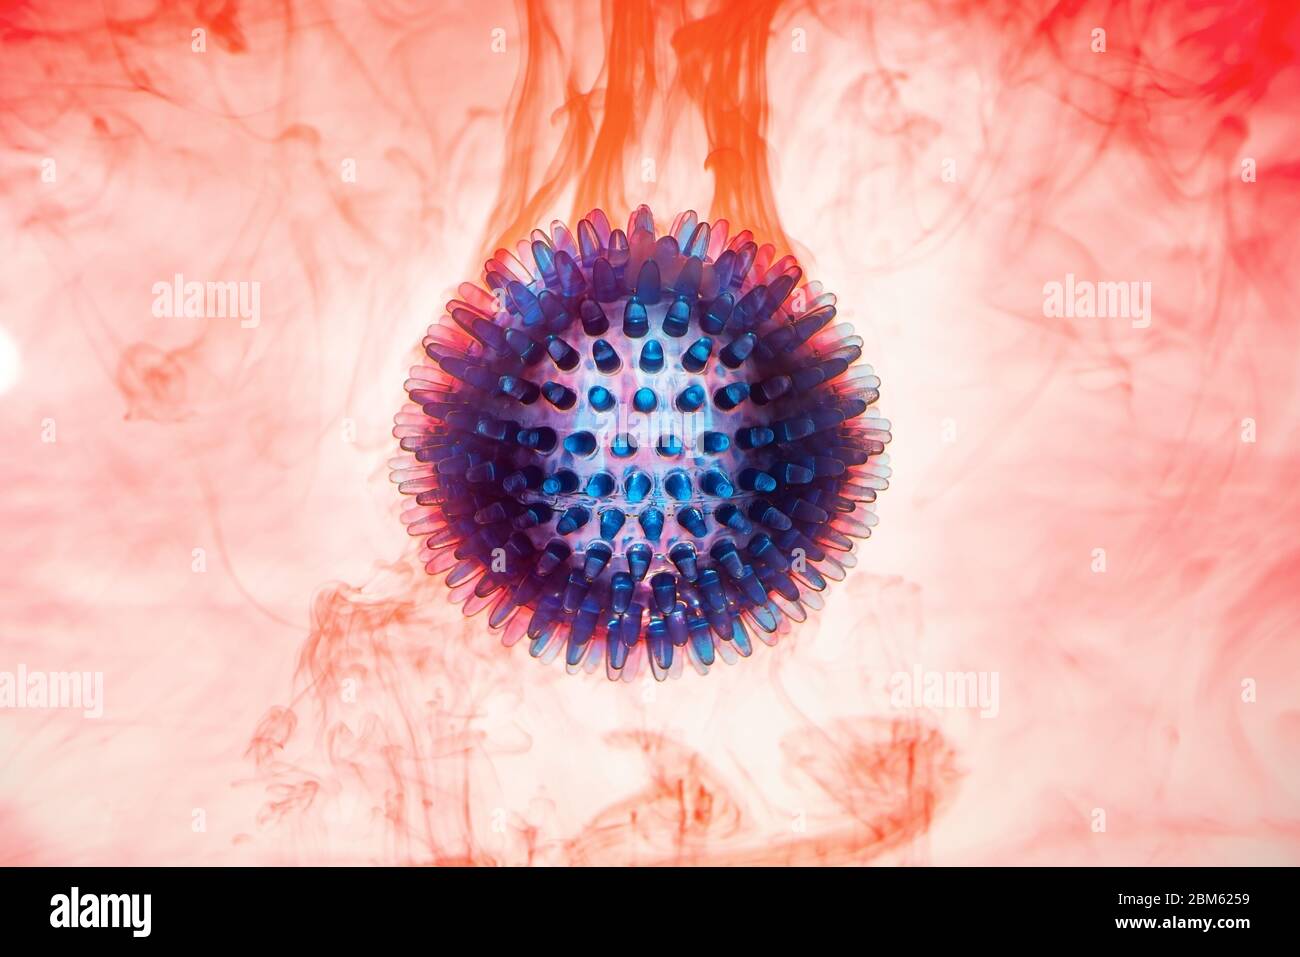 Rubber ball, simulation, coronavirus, pandemic bacteria model on red-white background in blood. Copy space. Stock Photo